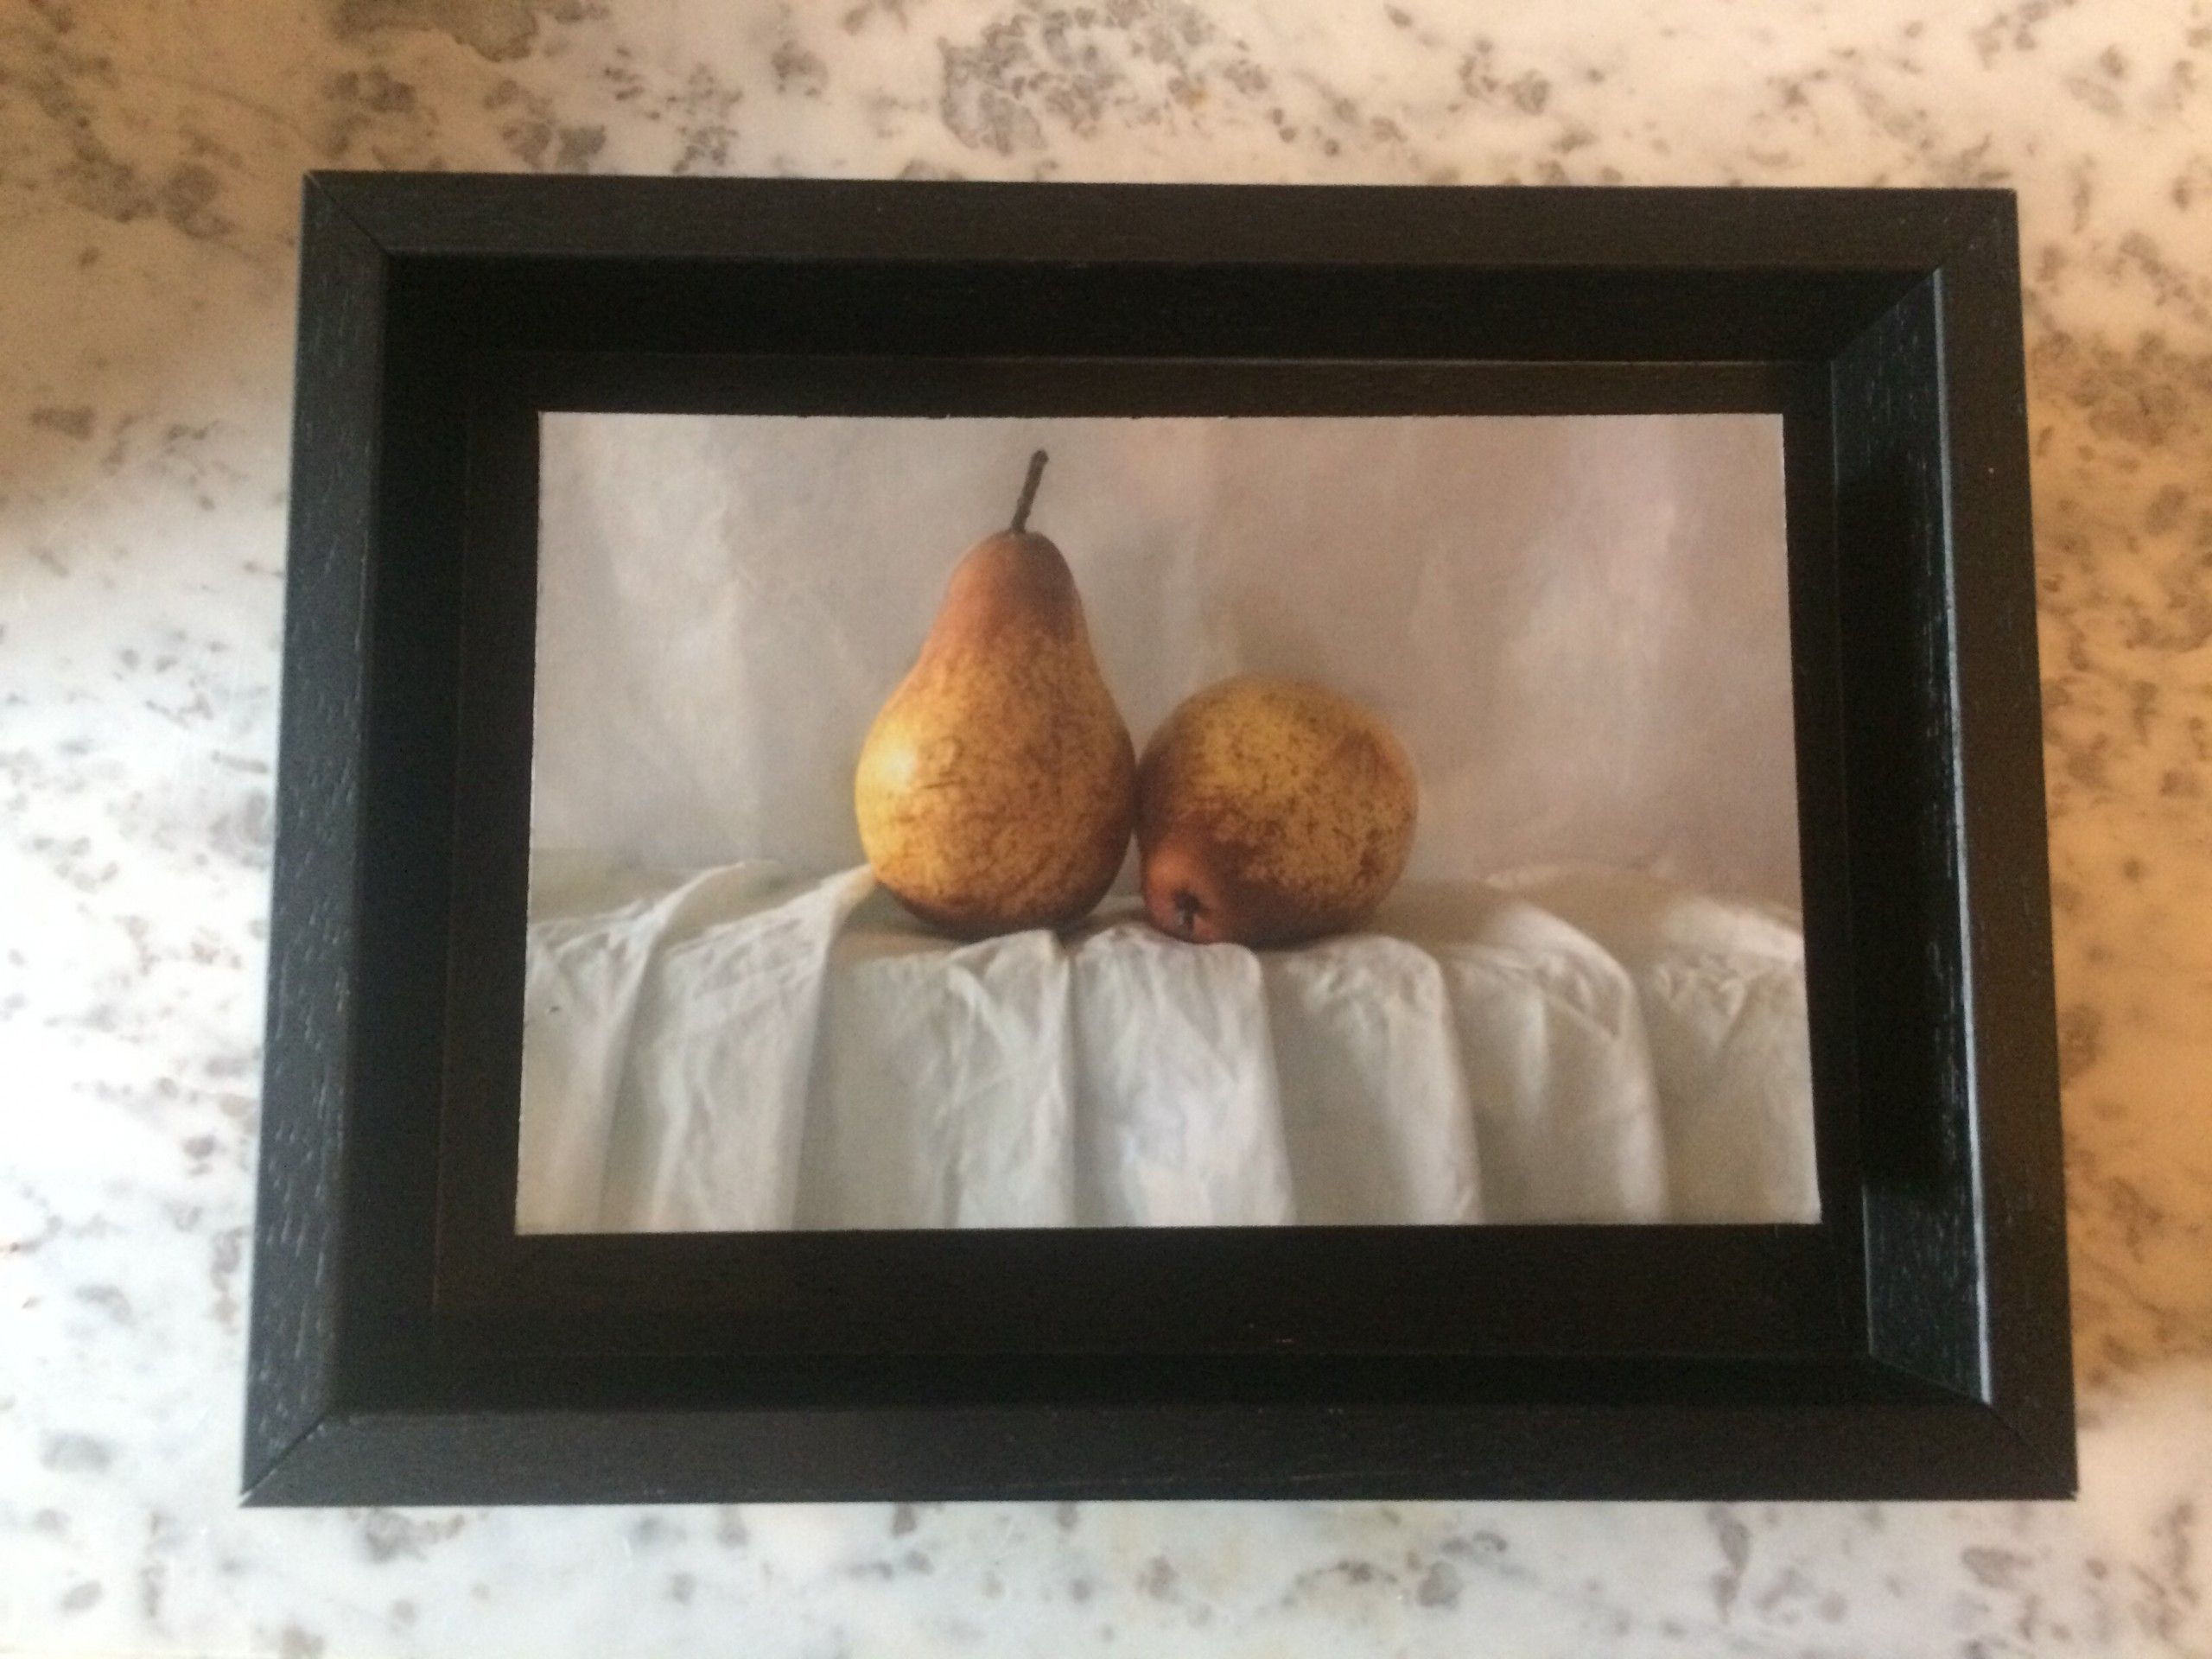 Pears by Kate Verrion - Secondary Image